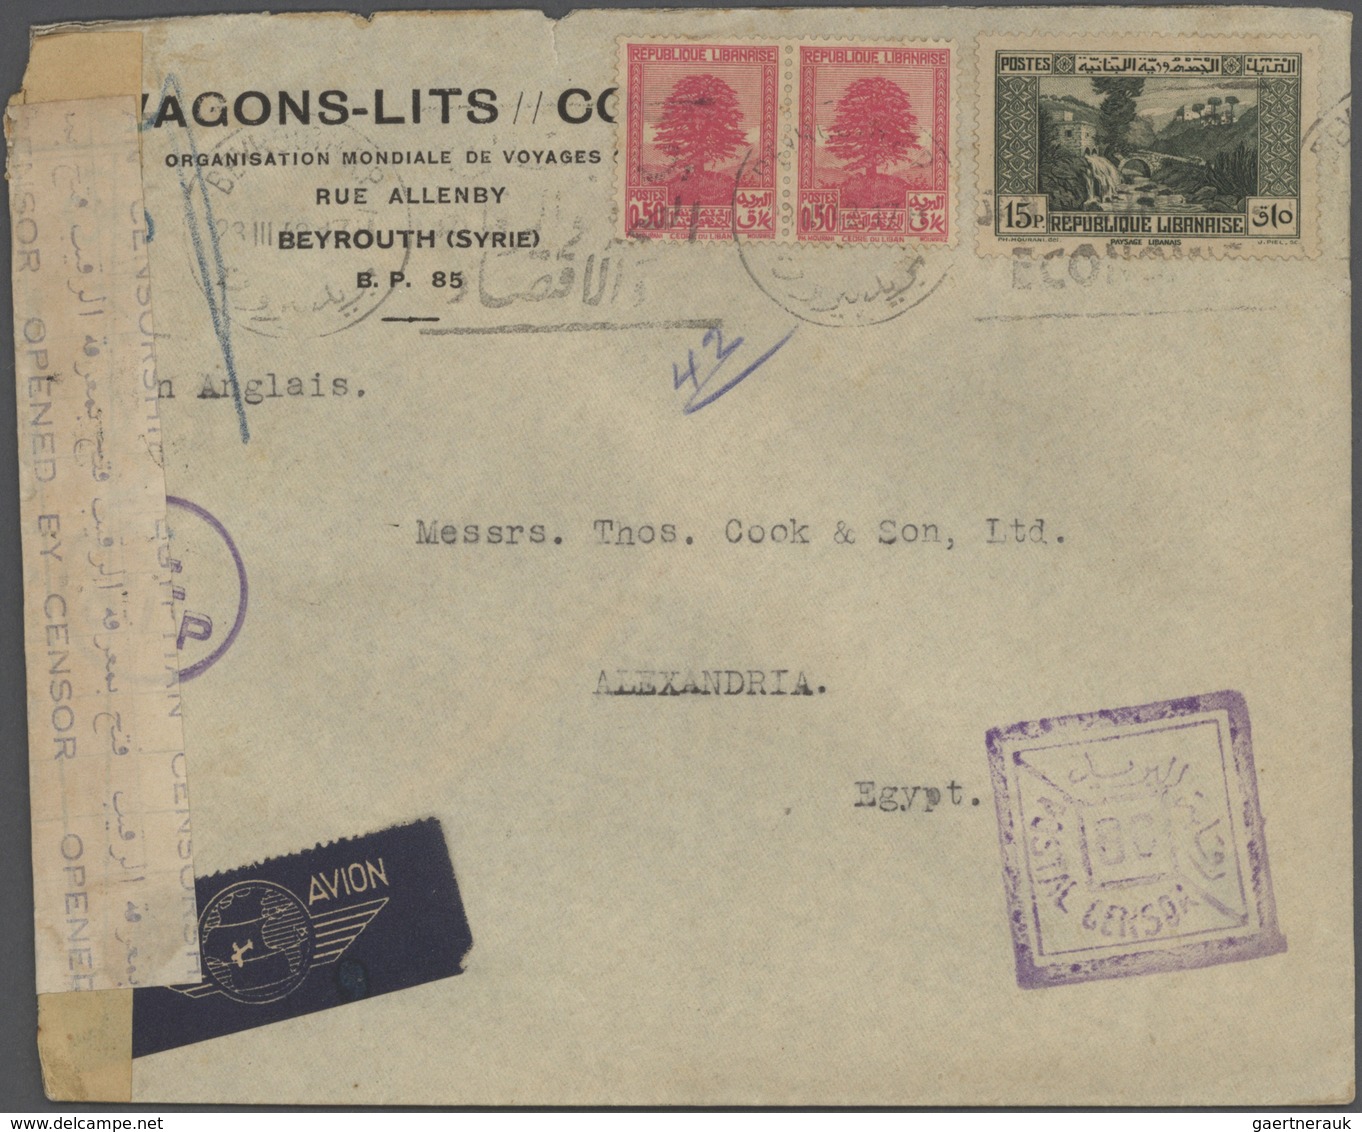 23441 Libanon: 1925-80, Box containing 330 covers and used stamps in 640 glassines, registered mail, air m